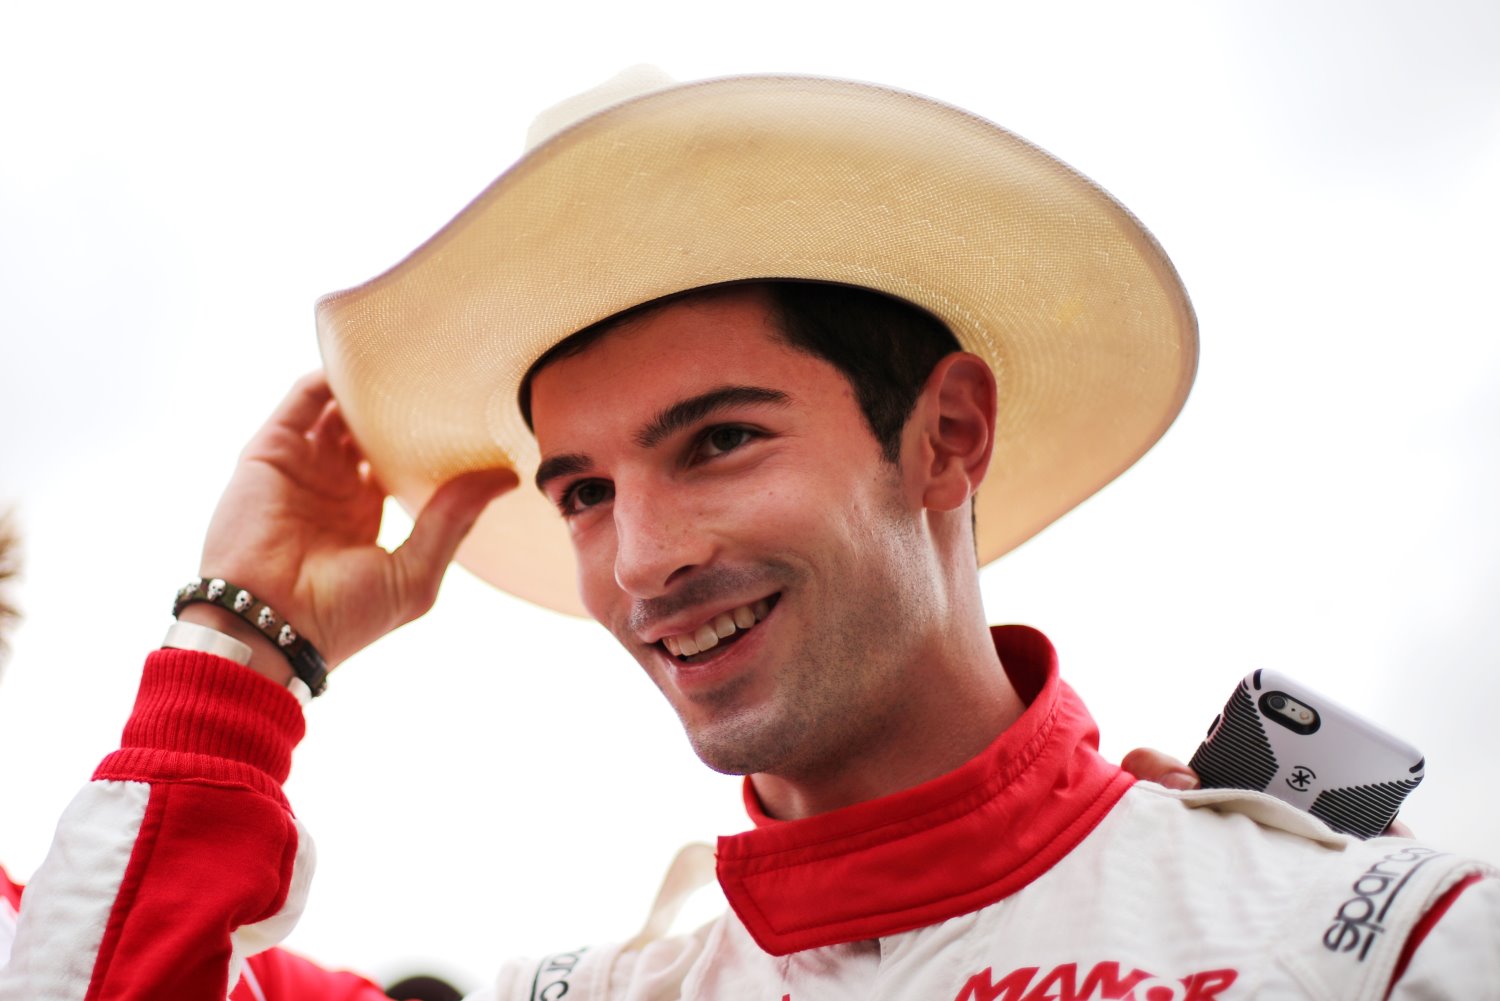 Will Alexander Rossi have a seat with the Manor-Mercedes team in 2016?